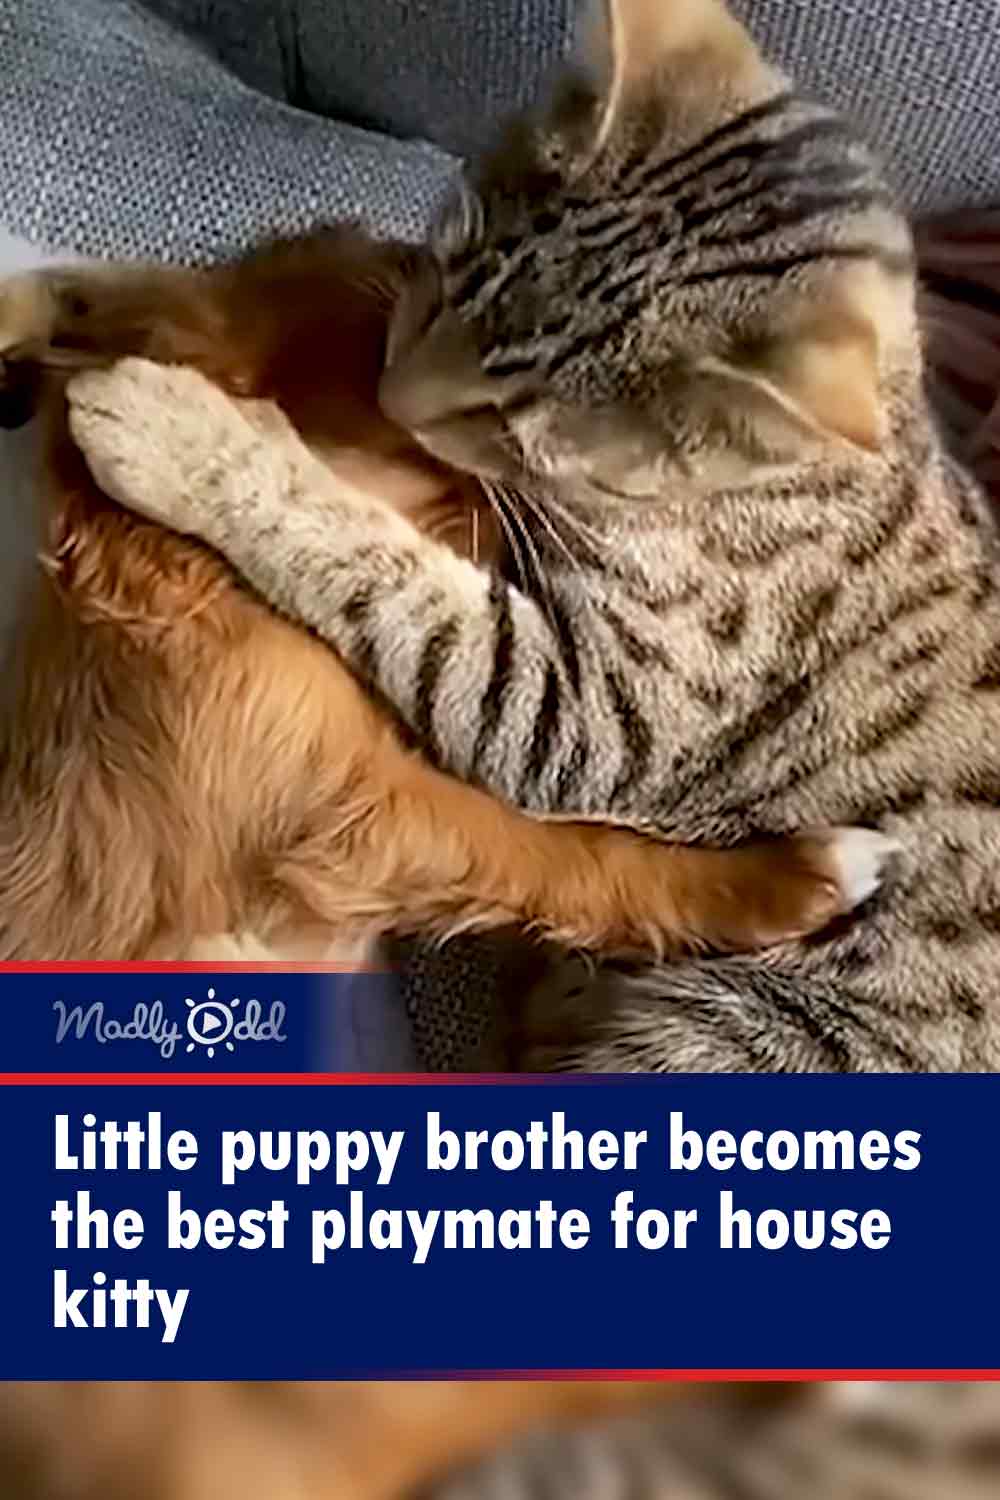 Little puppy brother becomes the best playmate for house kitty